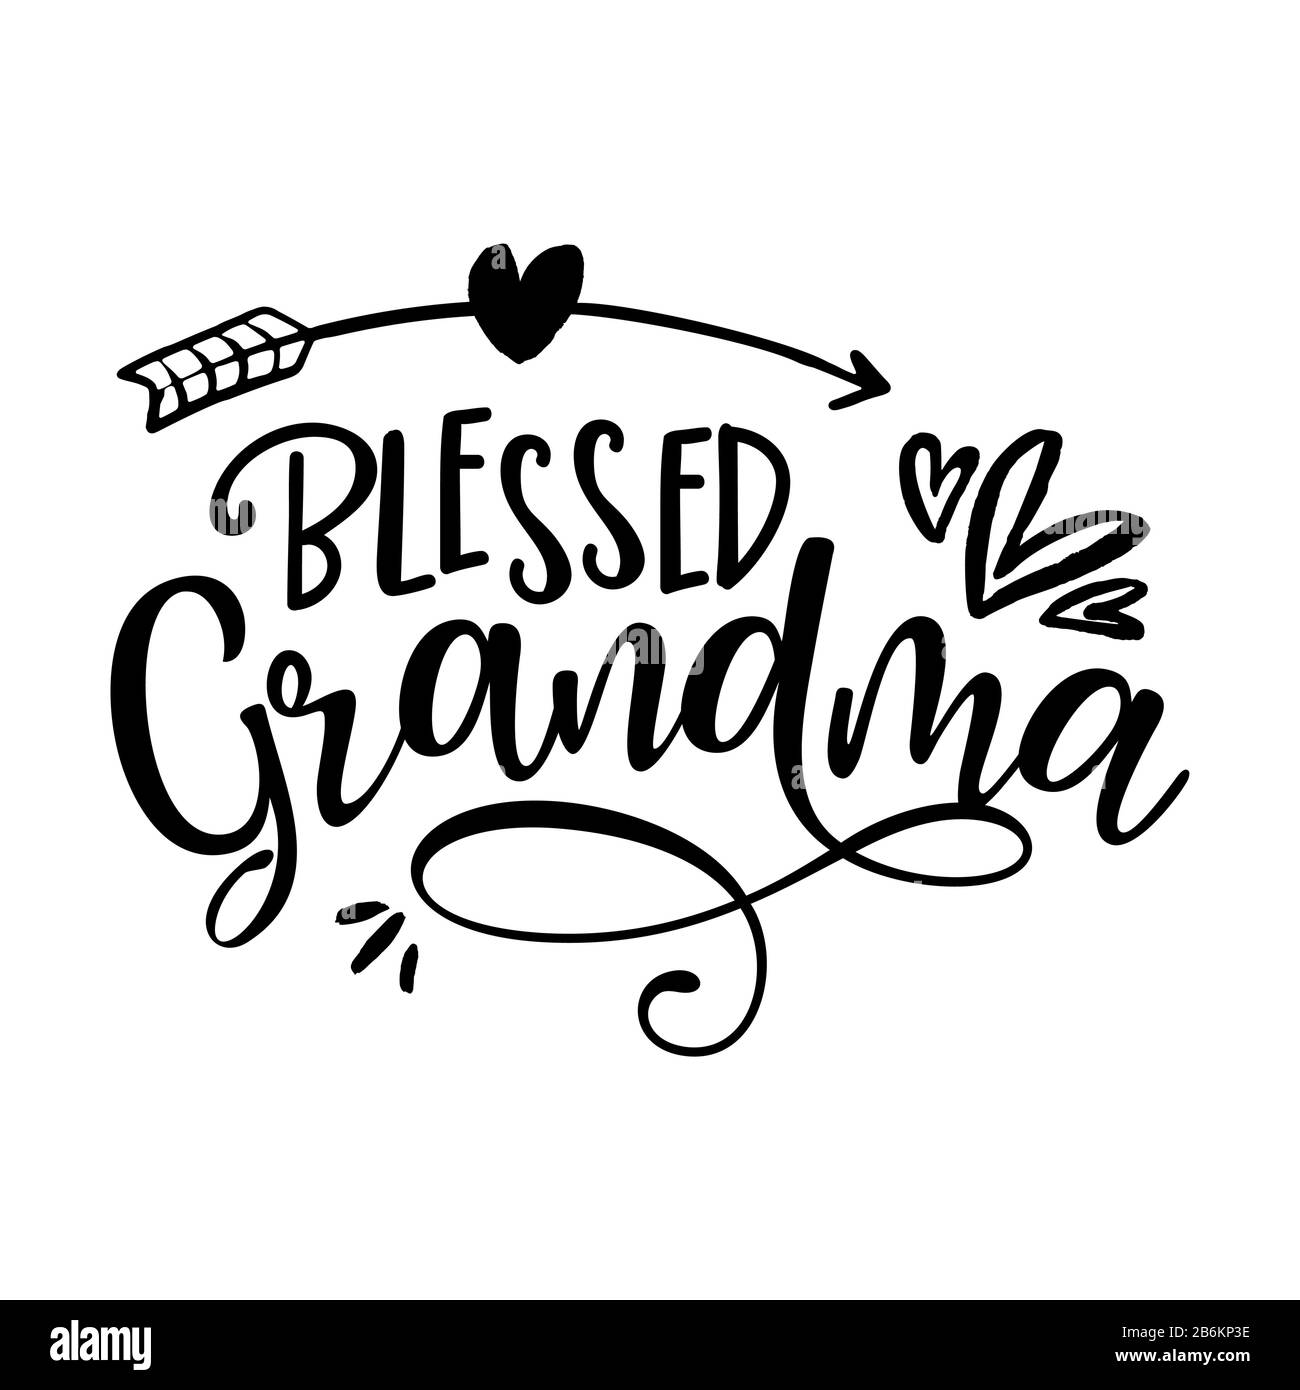 Blessed Grandma - funny vector quotes with hearts and arrow. Good for Mother's day gift or scrap booking, posters, textiles, gifts. Stock Vector